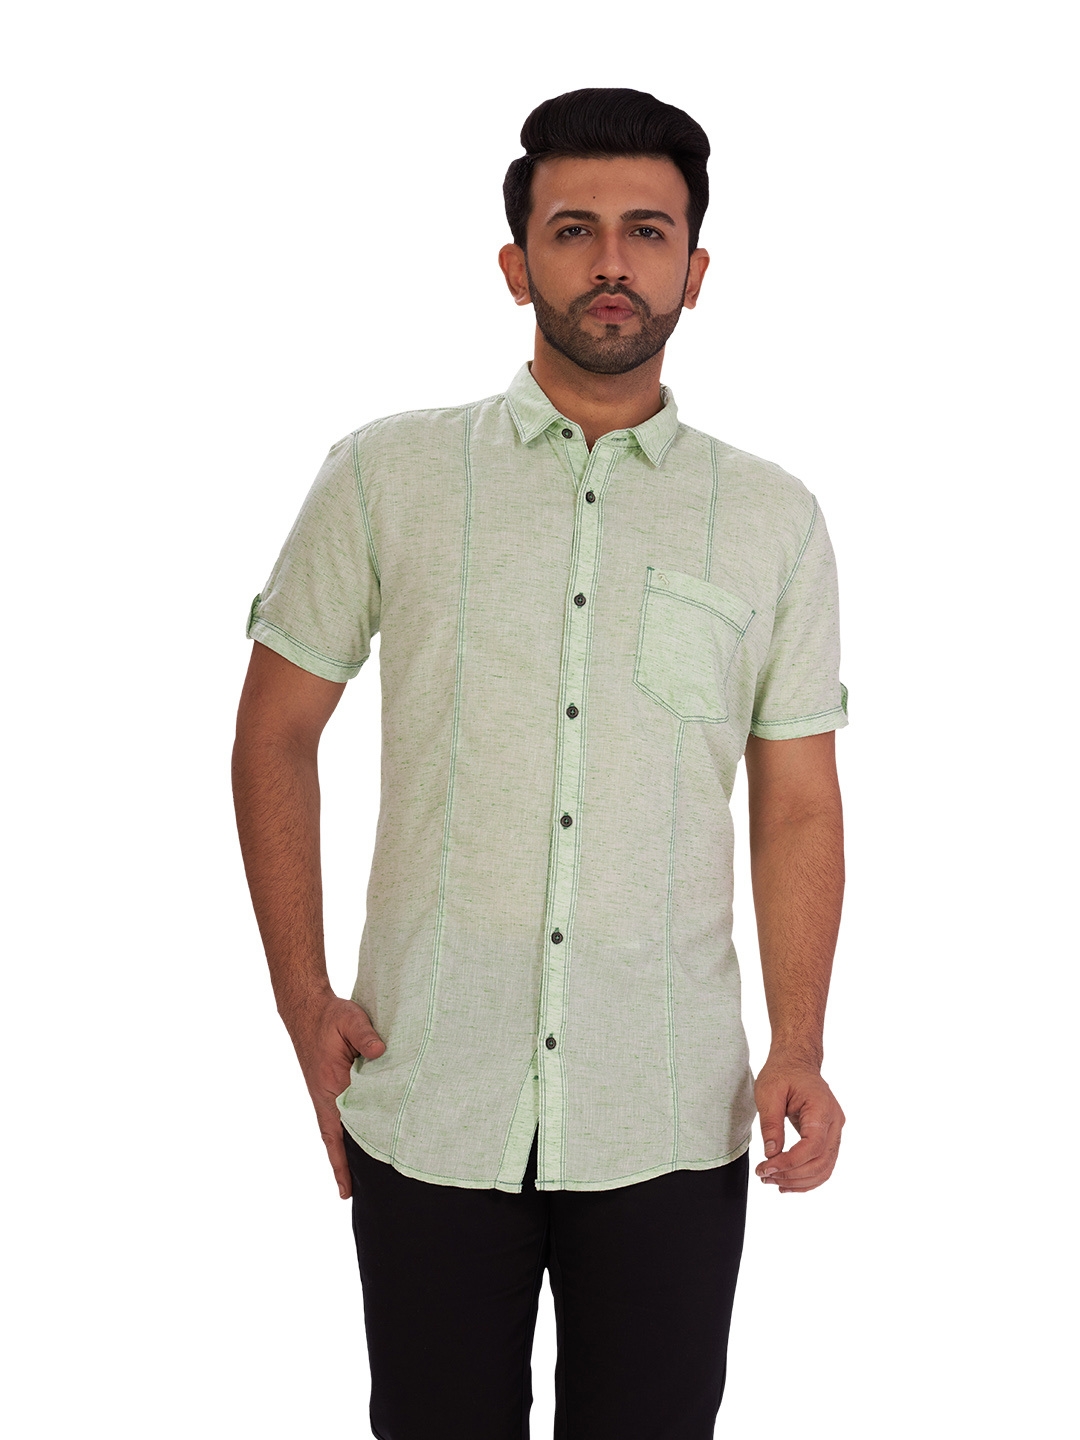 D'cot by Donear | D'cot by Donear Men's Green Cotton Casual Shirts